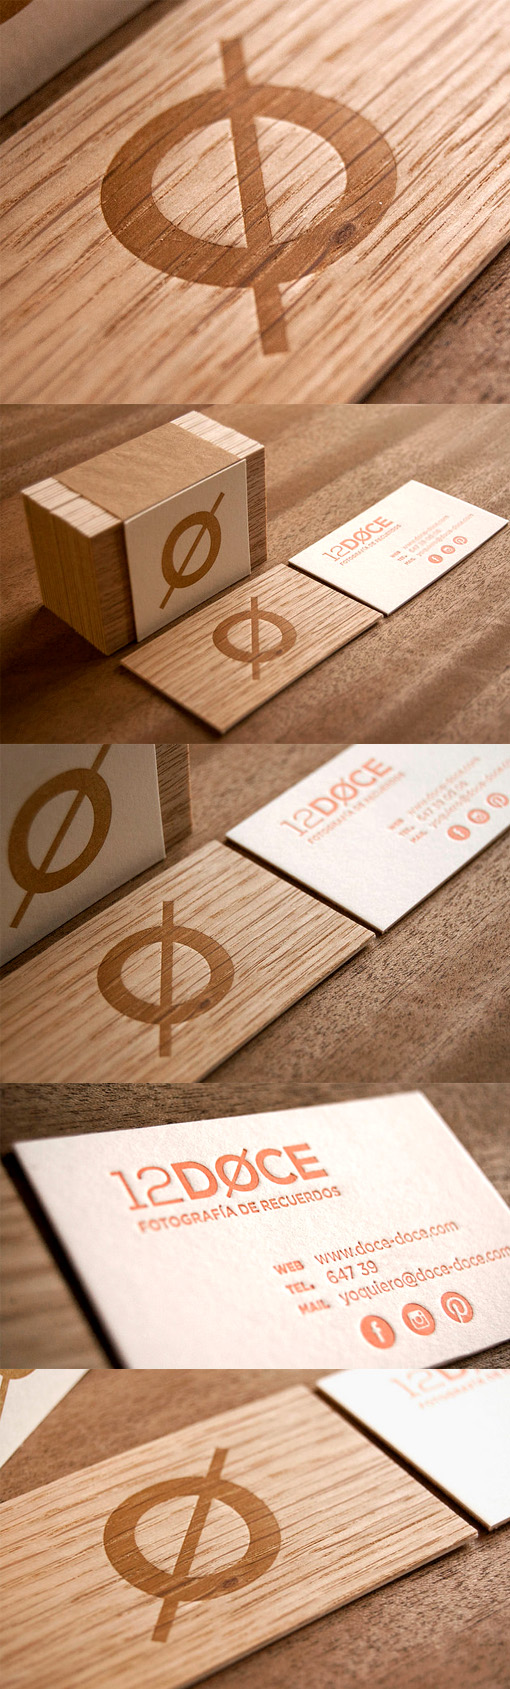 Striking Letterpress Printed Layered Wooden Business Card For A Photography Studio